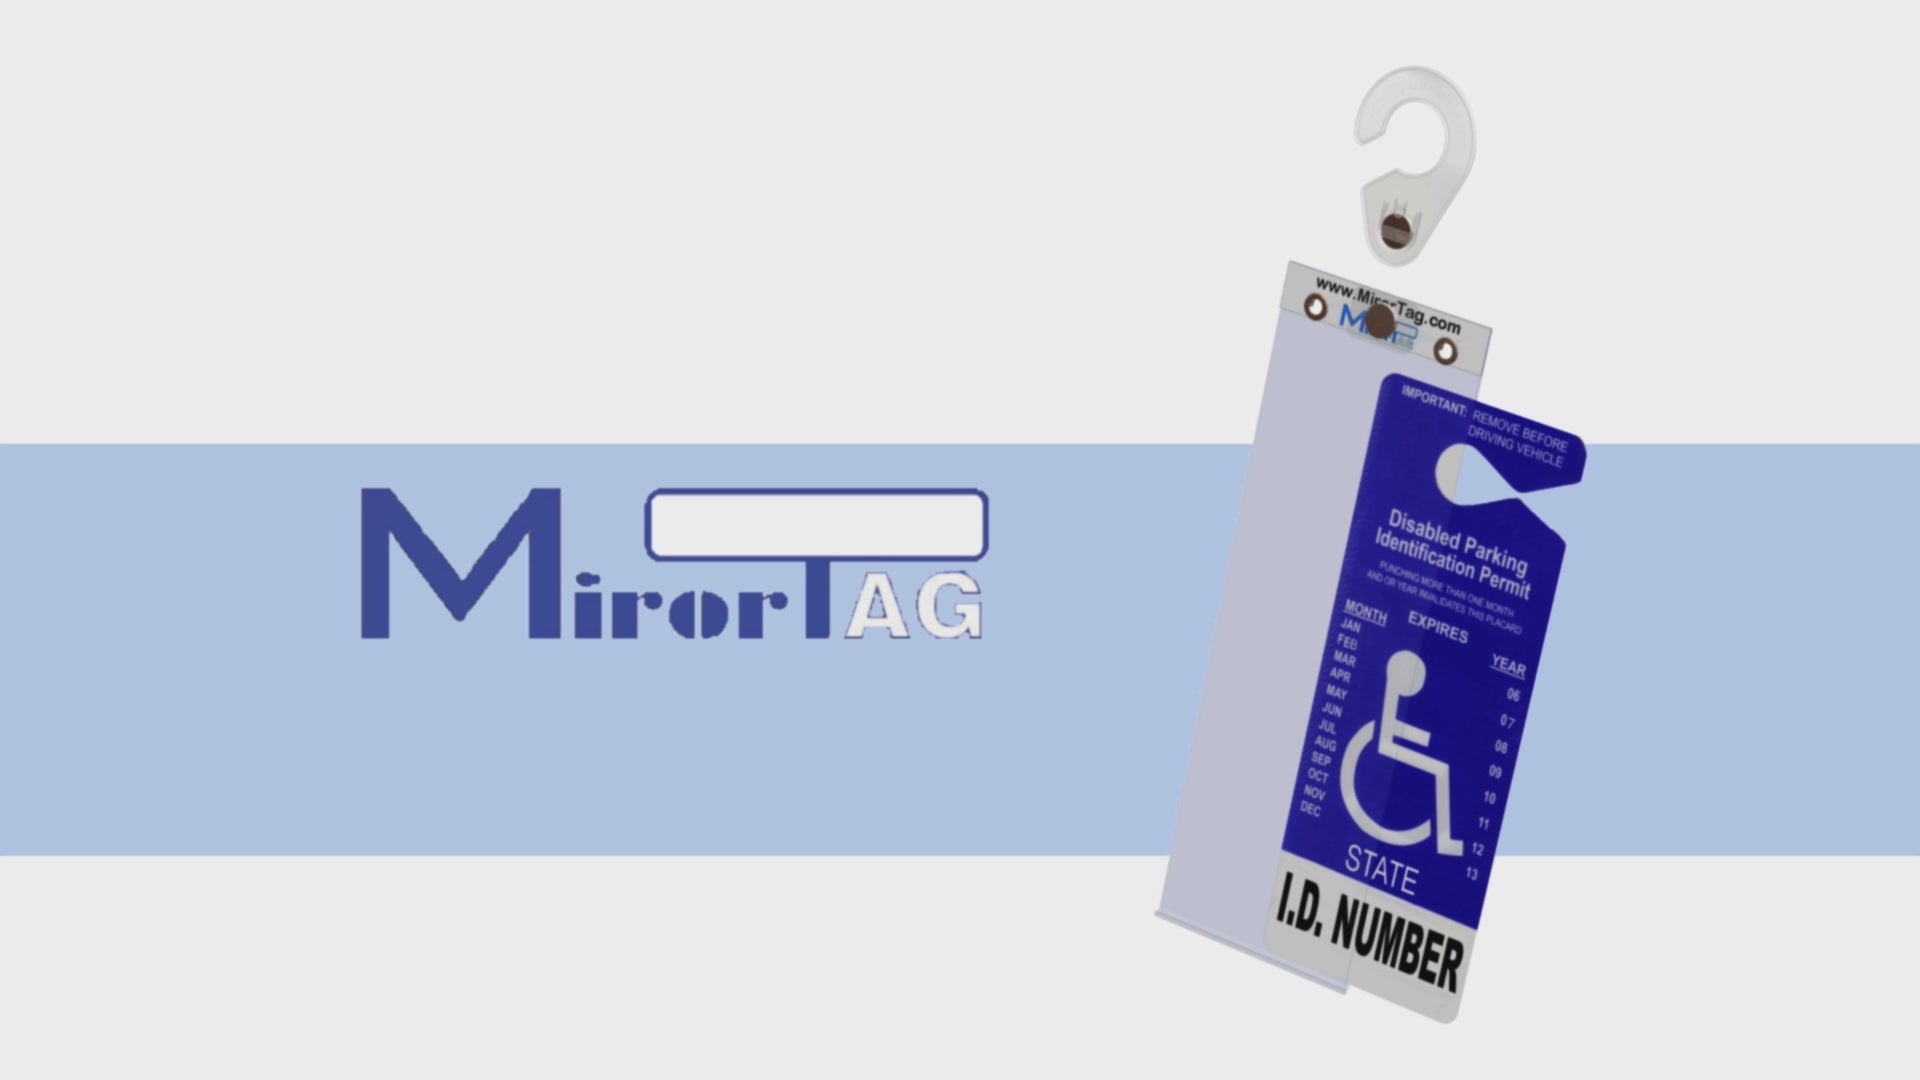 Mirror mounted handicap parking permit hang tag holder. Magnetically attach and detach your tag